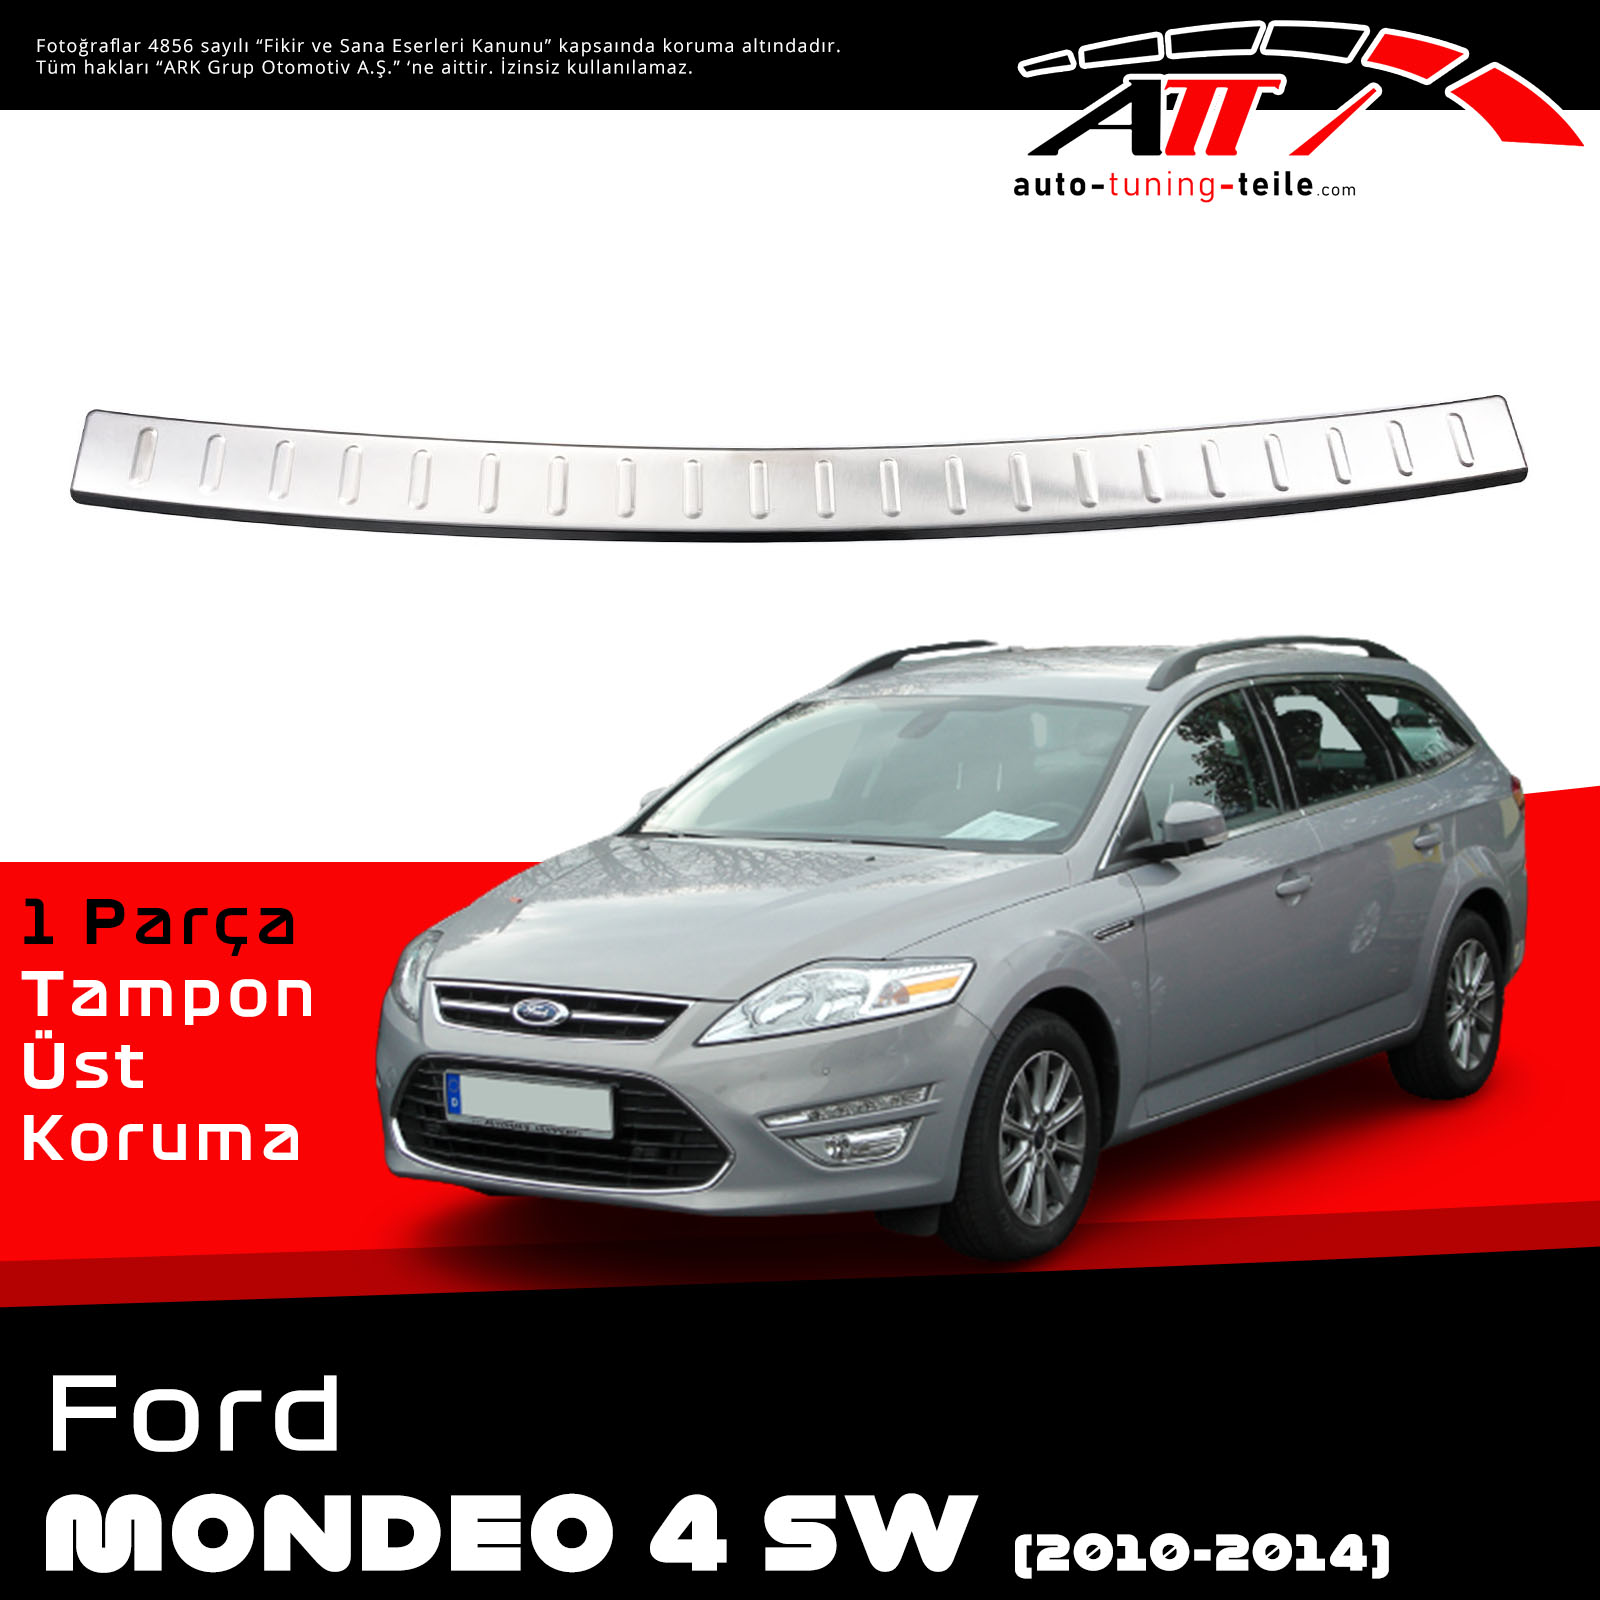 REAR BUMPER SILL COVER S. STEEL FORD MONDEO TURNER 4 bj 2010-2014 CHROM